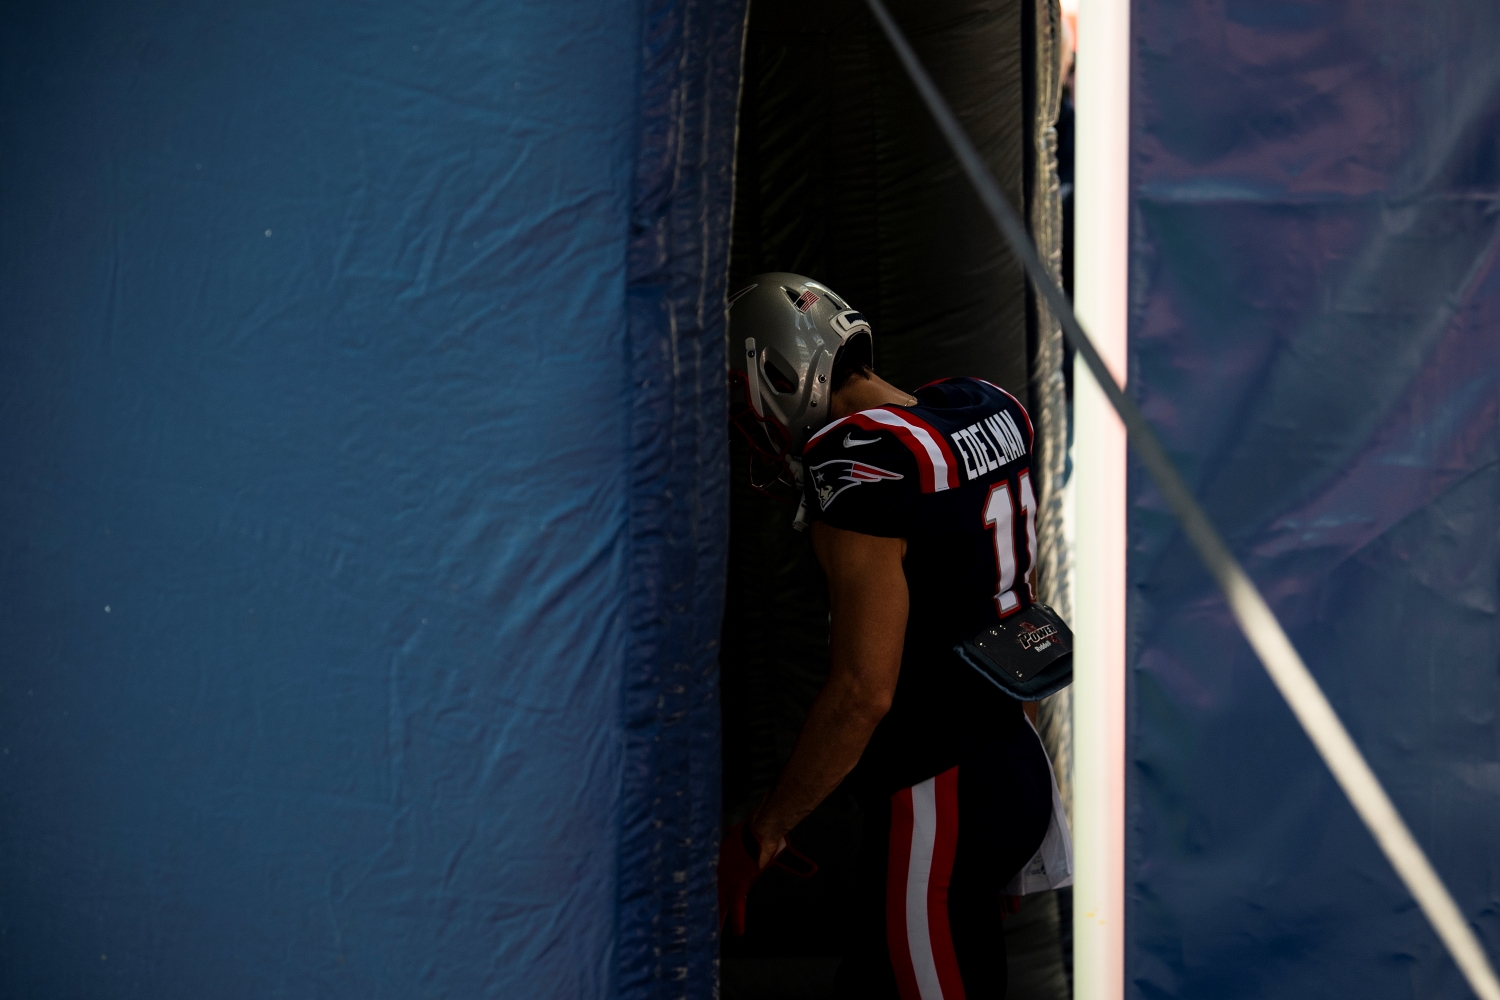 New England Patriots receiver Julian Edelman walks through the tunnel before a 2020 game against the Denver Broncos.